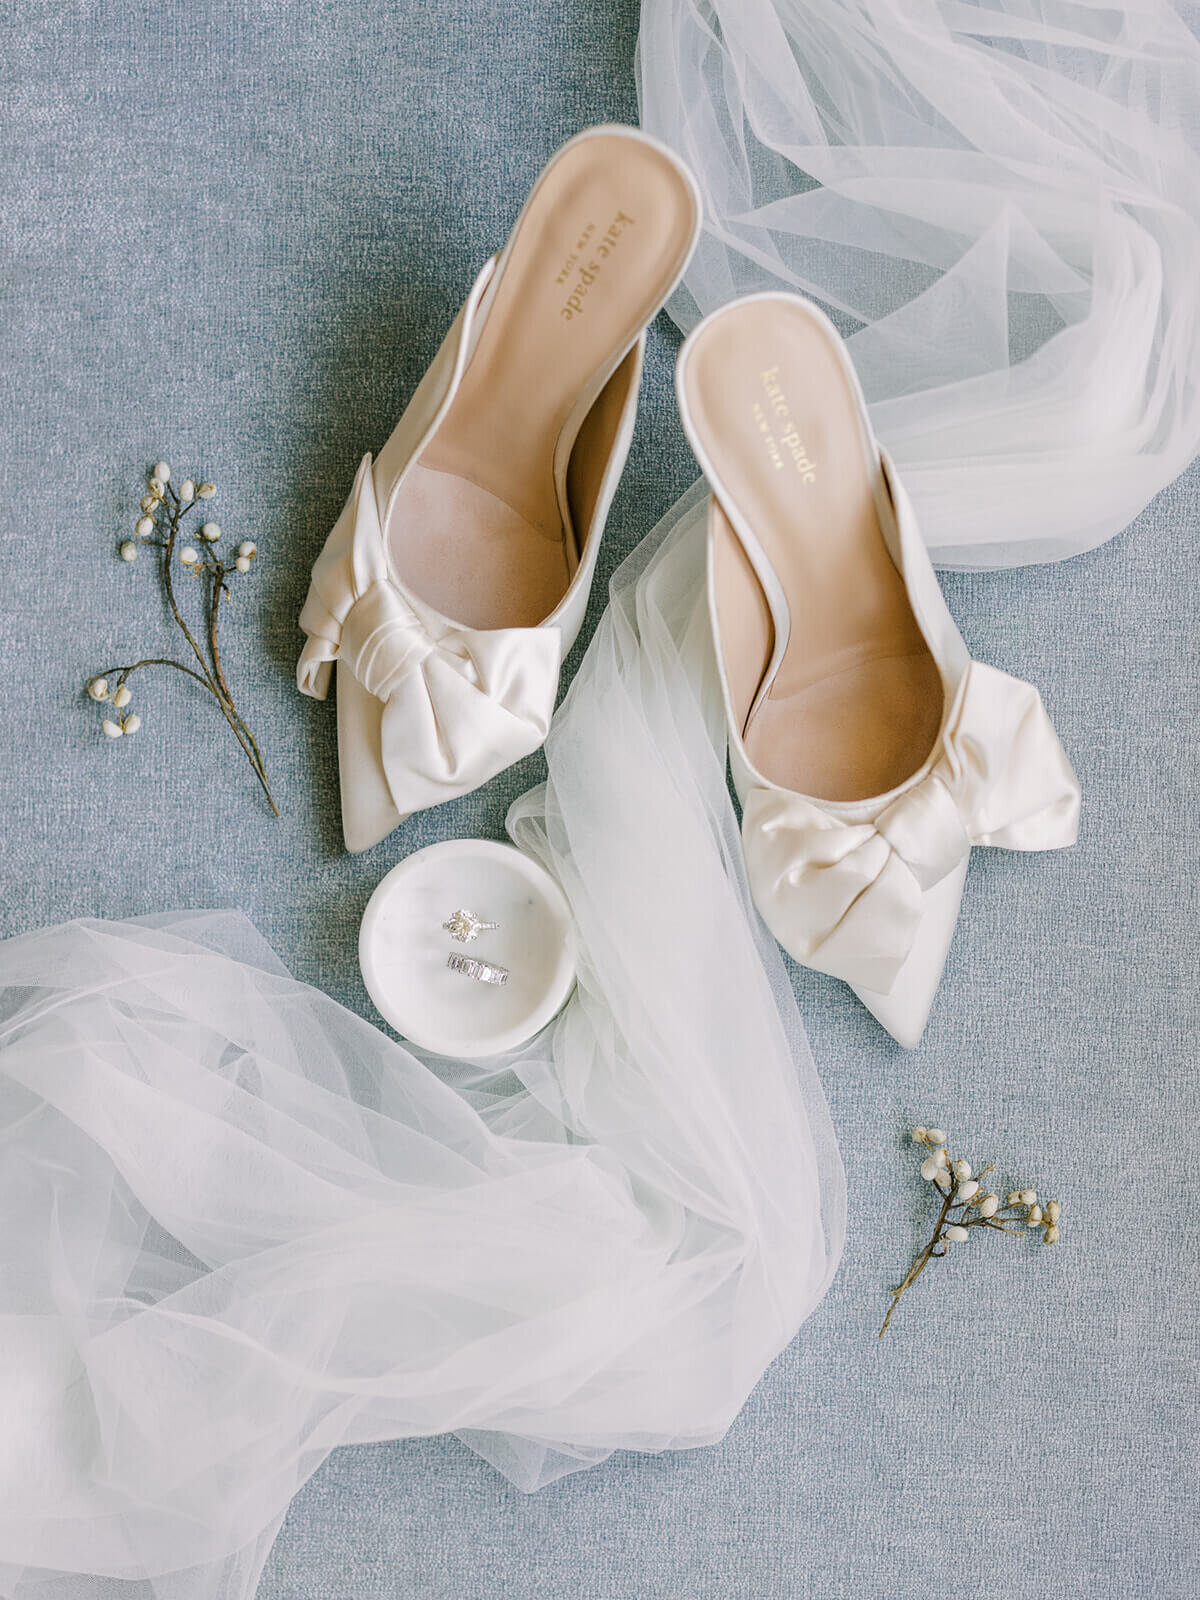 Bride's shoes and jewelry before the ceremony